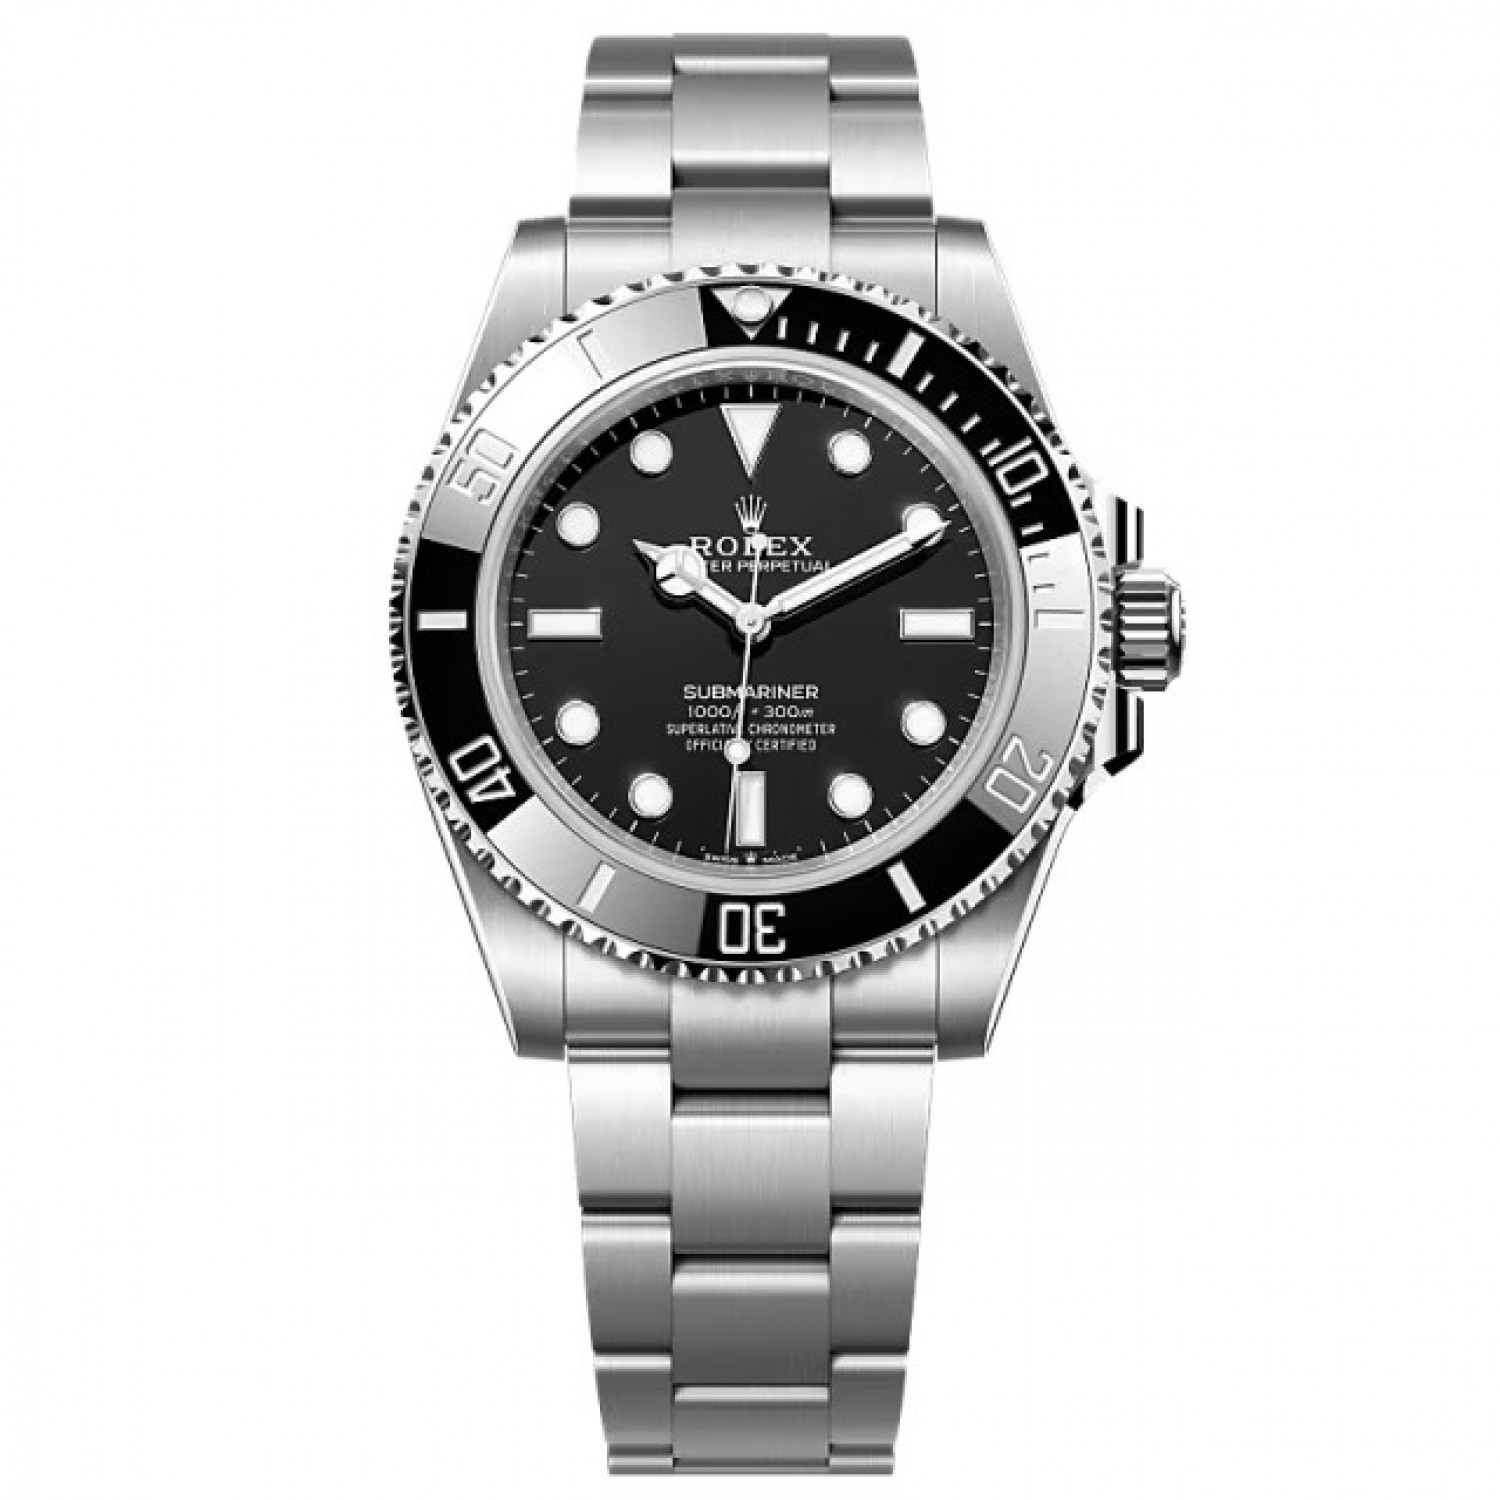 Rolex Submariner Date 41mm Oystersteel|Reference 126610LN